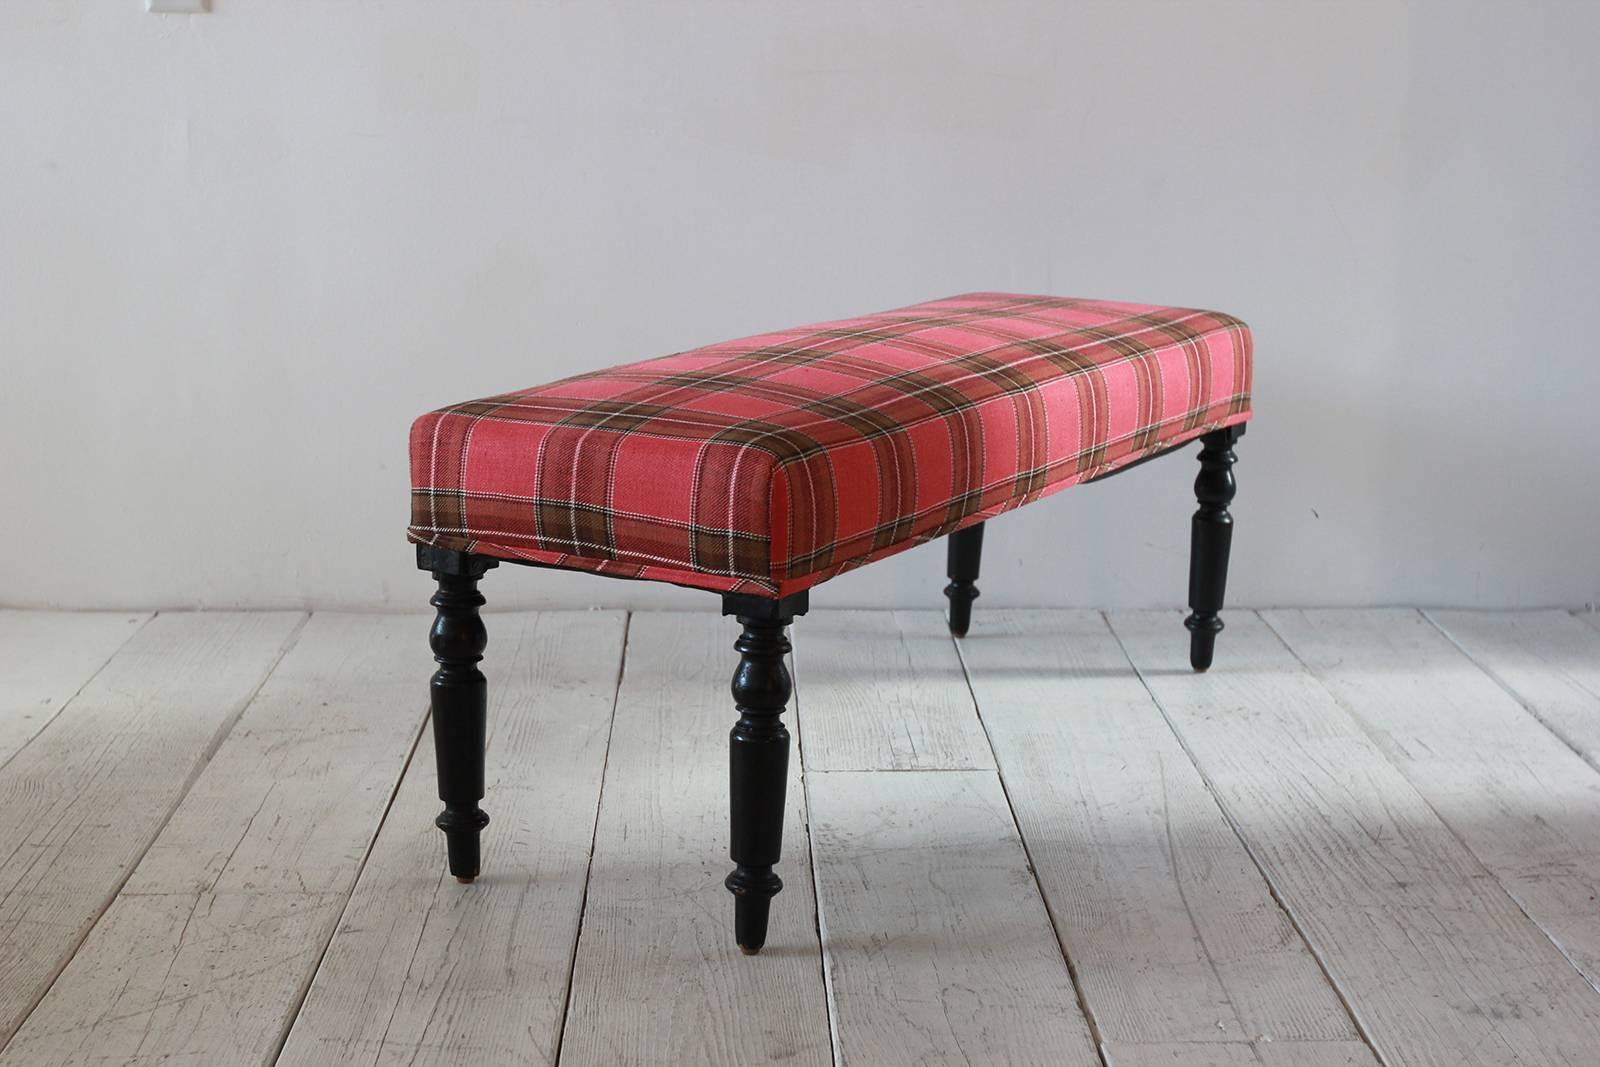 Vintage bench with mahogany turned legs newly upholstered in red plaid fabric.